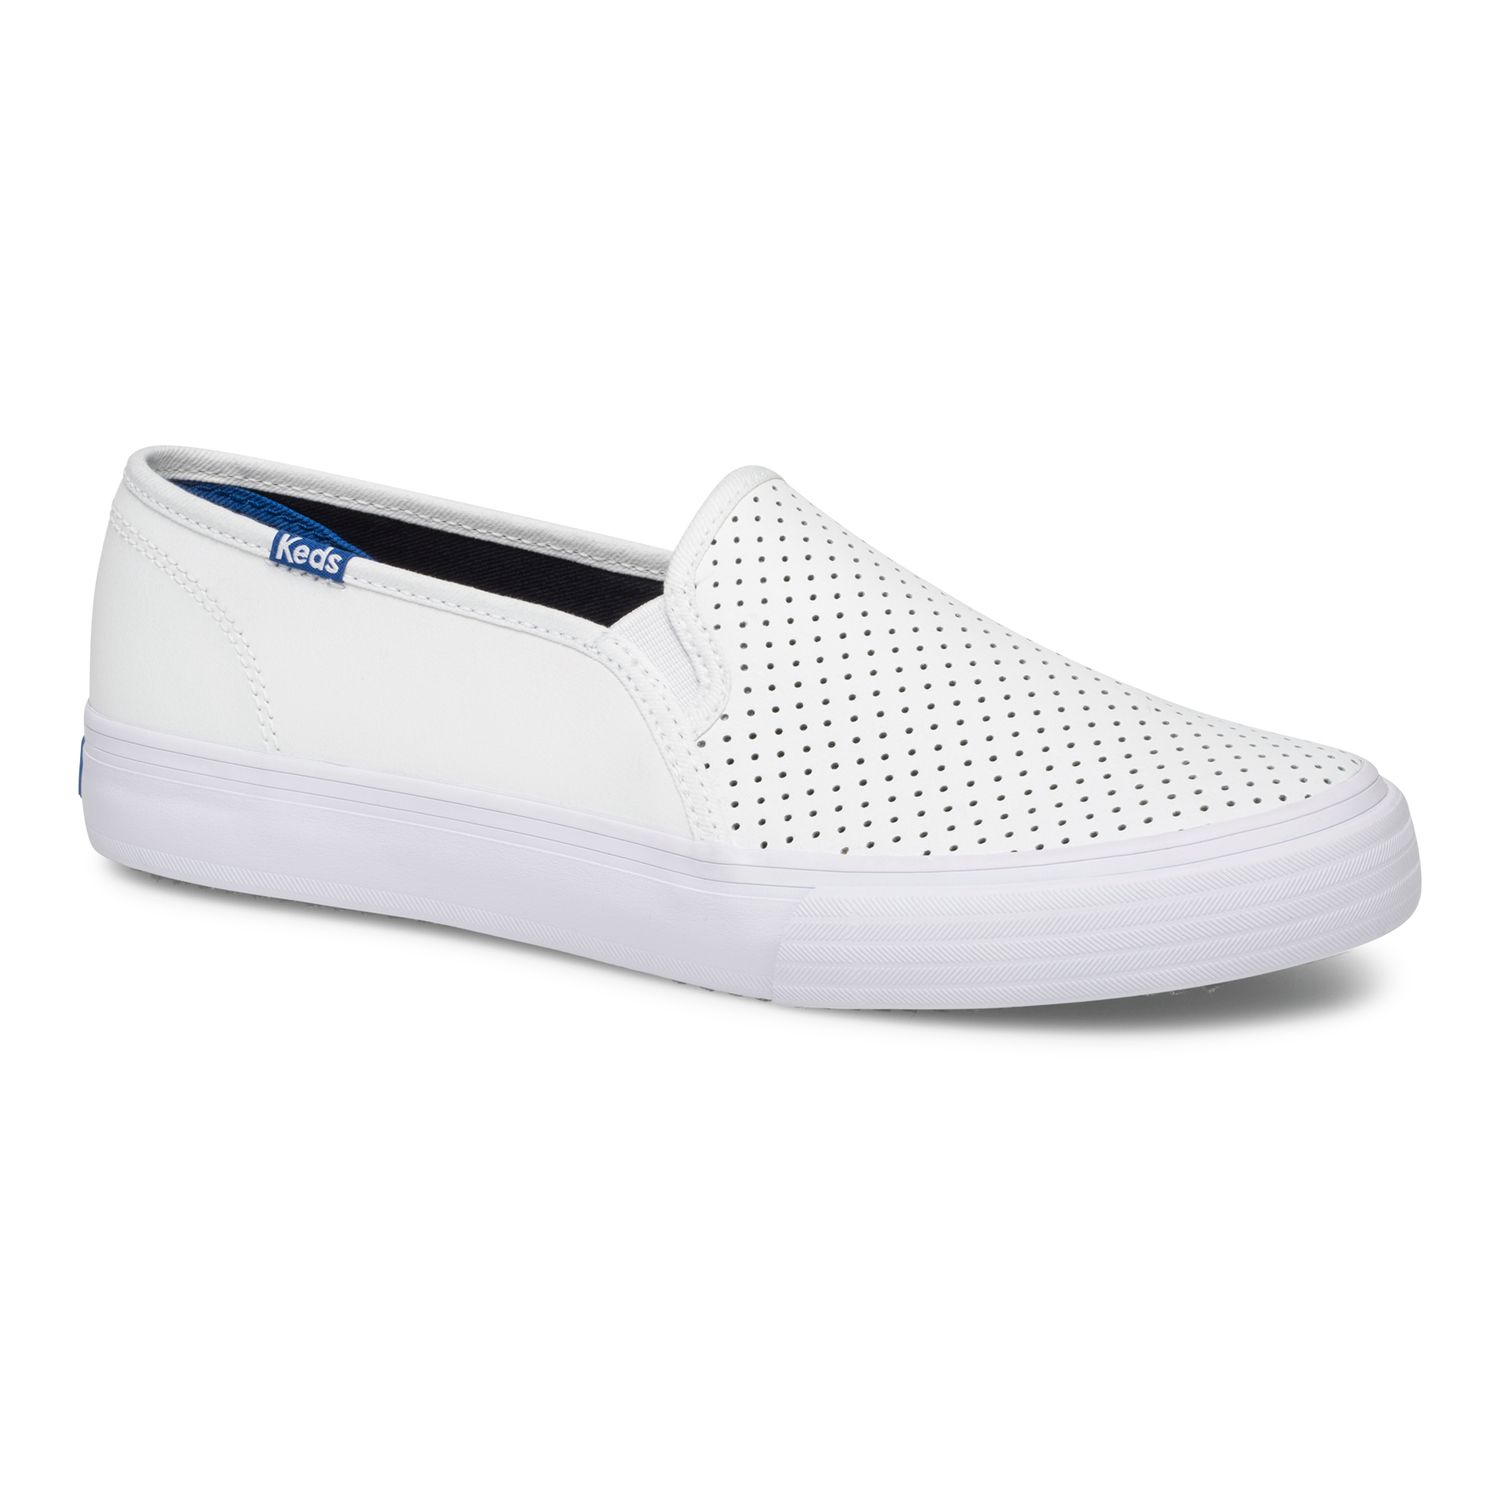 Perforated Leather Slip-on Shoes